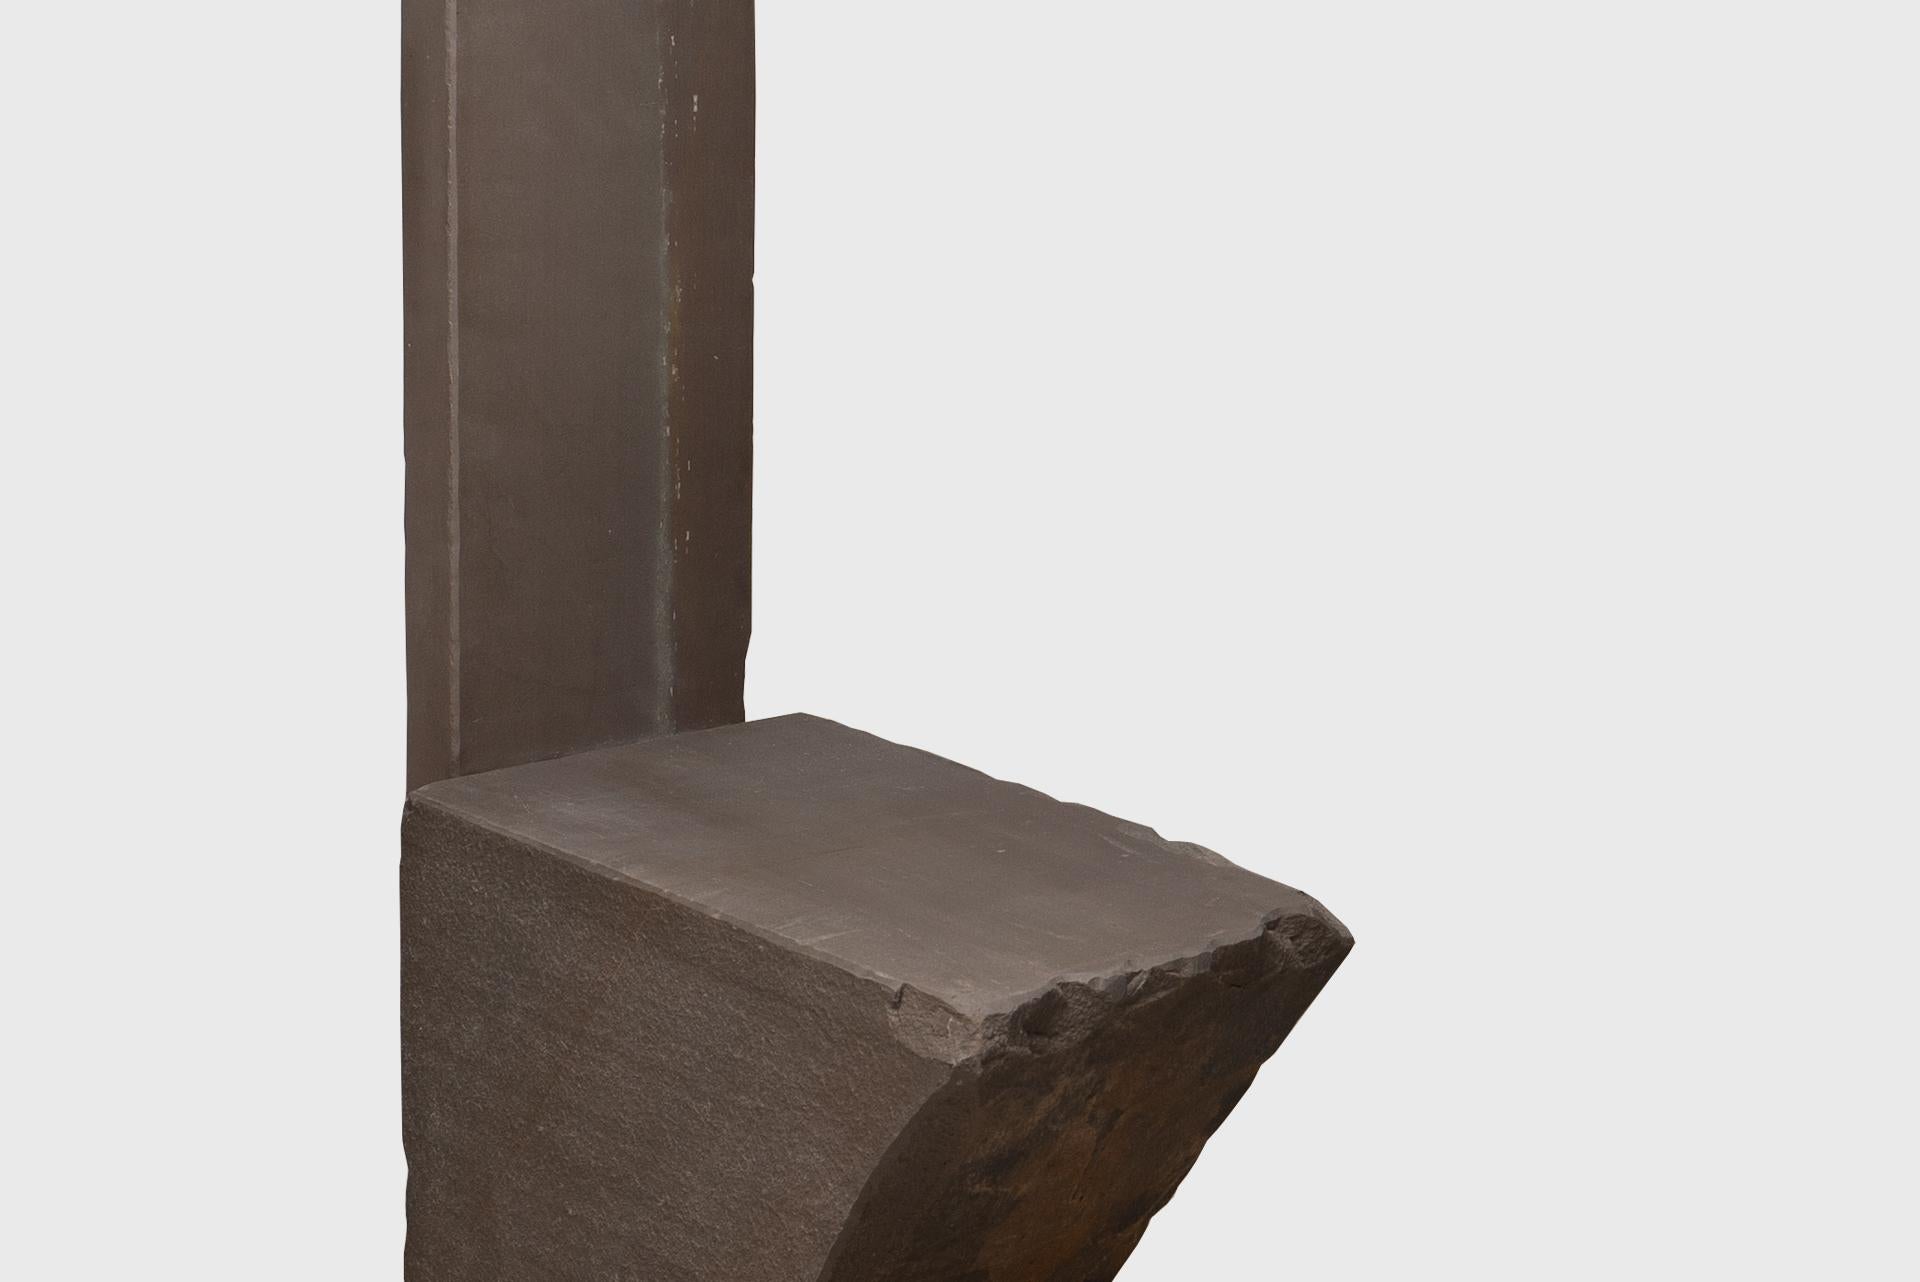 Contemporary Natural Chair 15, Graywacke Offcut Gray Stone, Carsten in der Elst For Sale 5